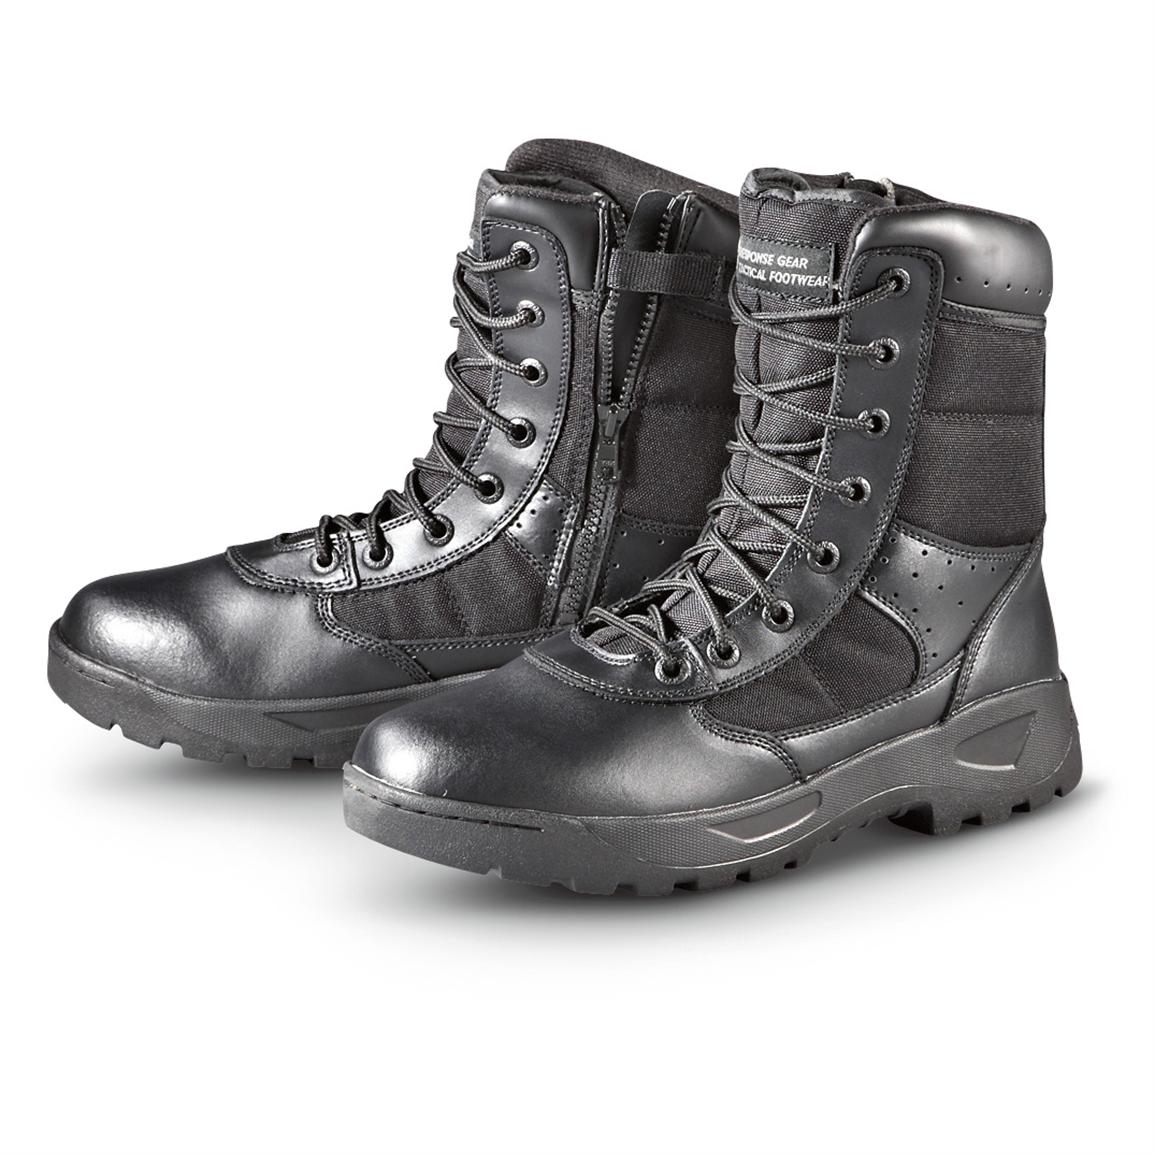 Buy > response gear tactical footwear boots > in stock